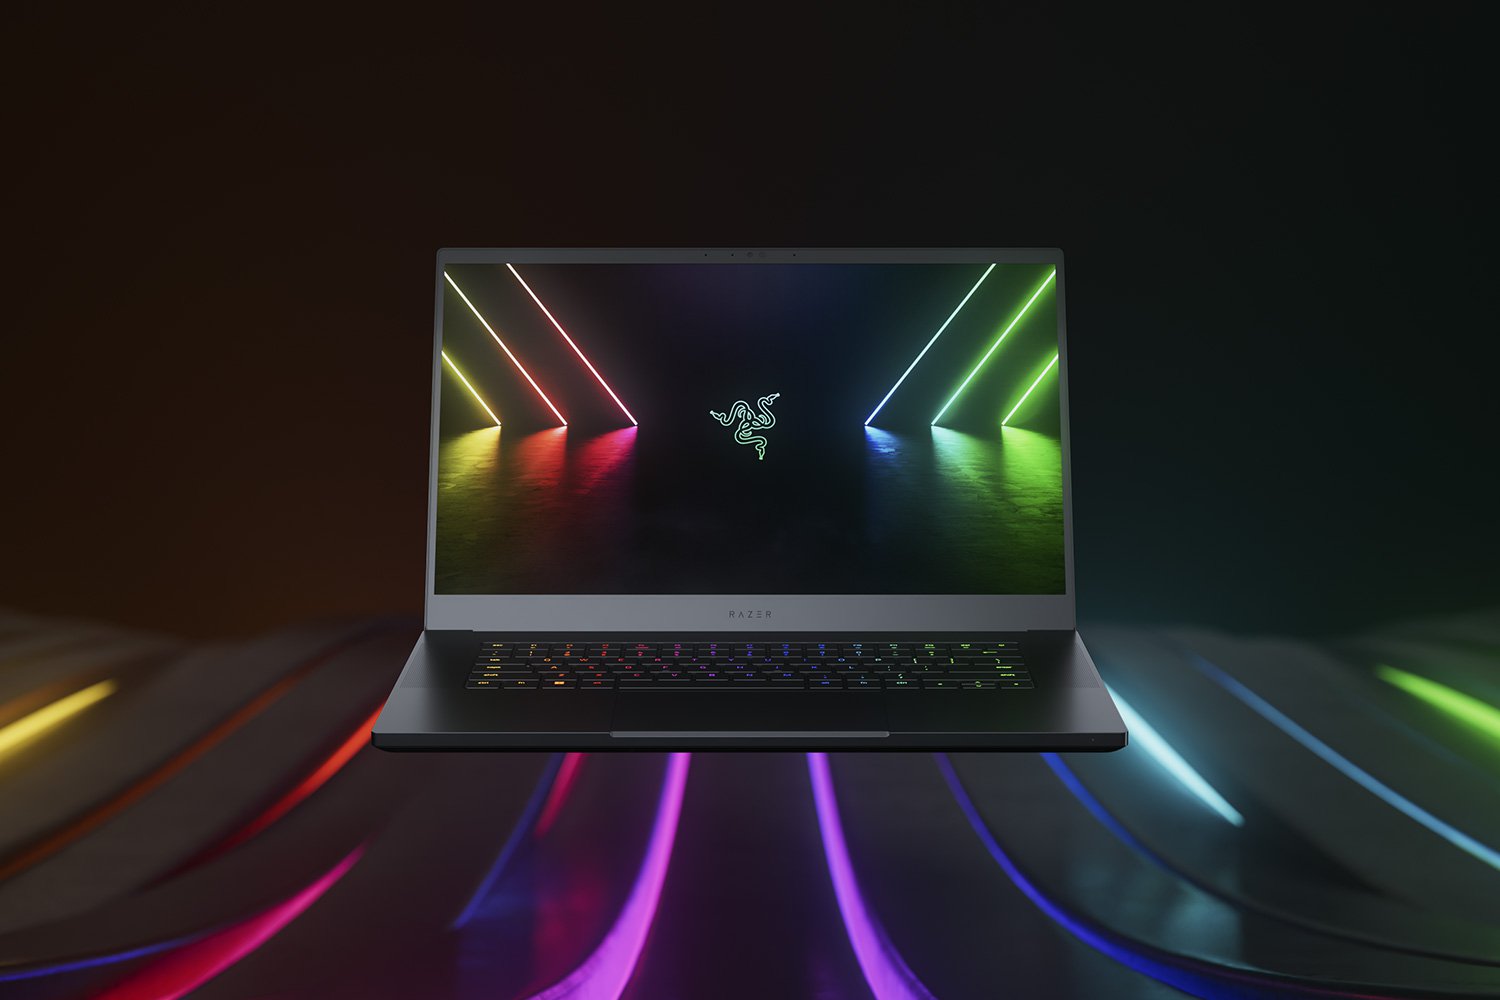 The Razer Blade 15 gaming laptop with RGB lighting on the background.